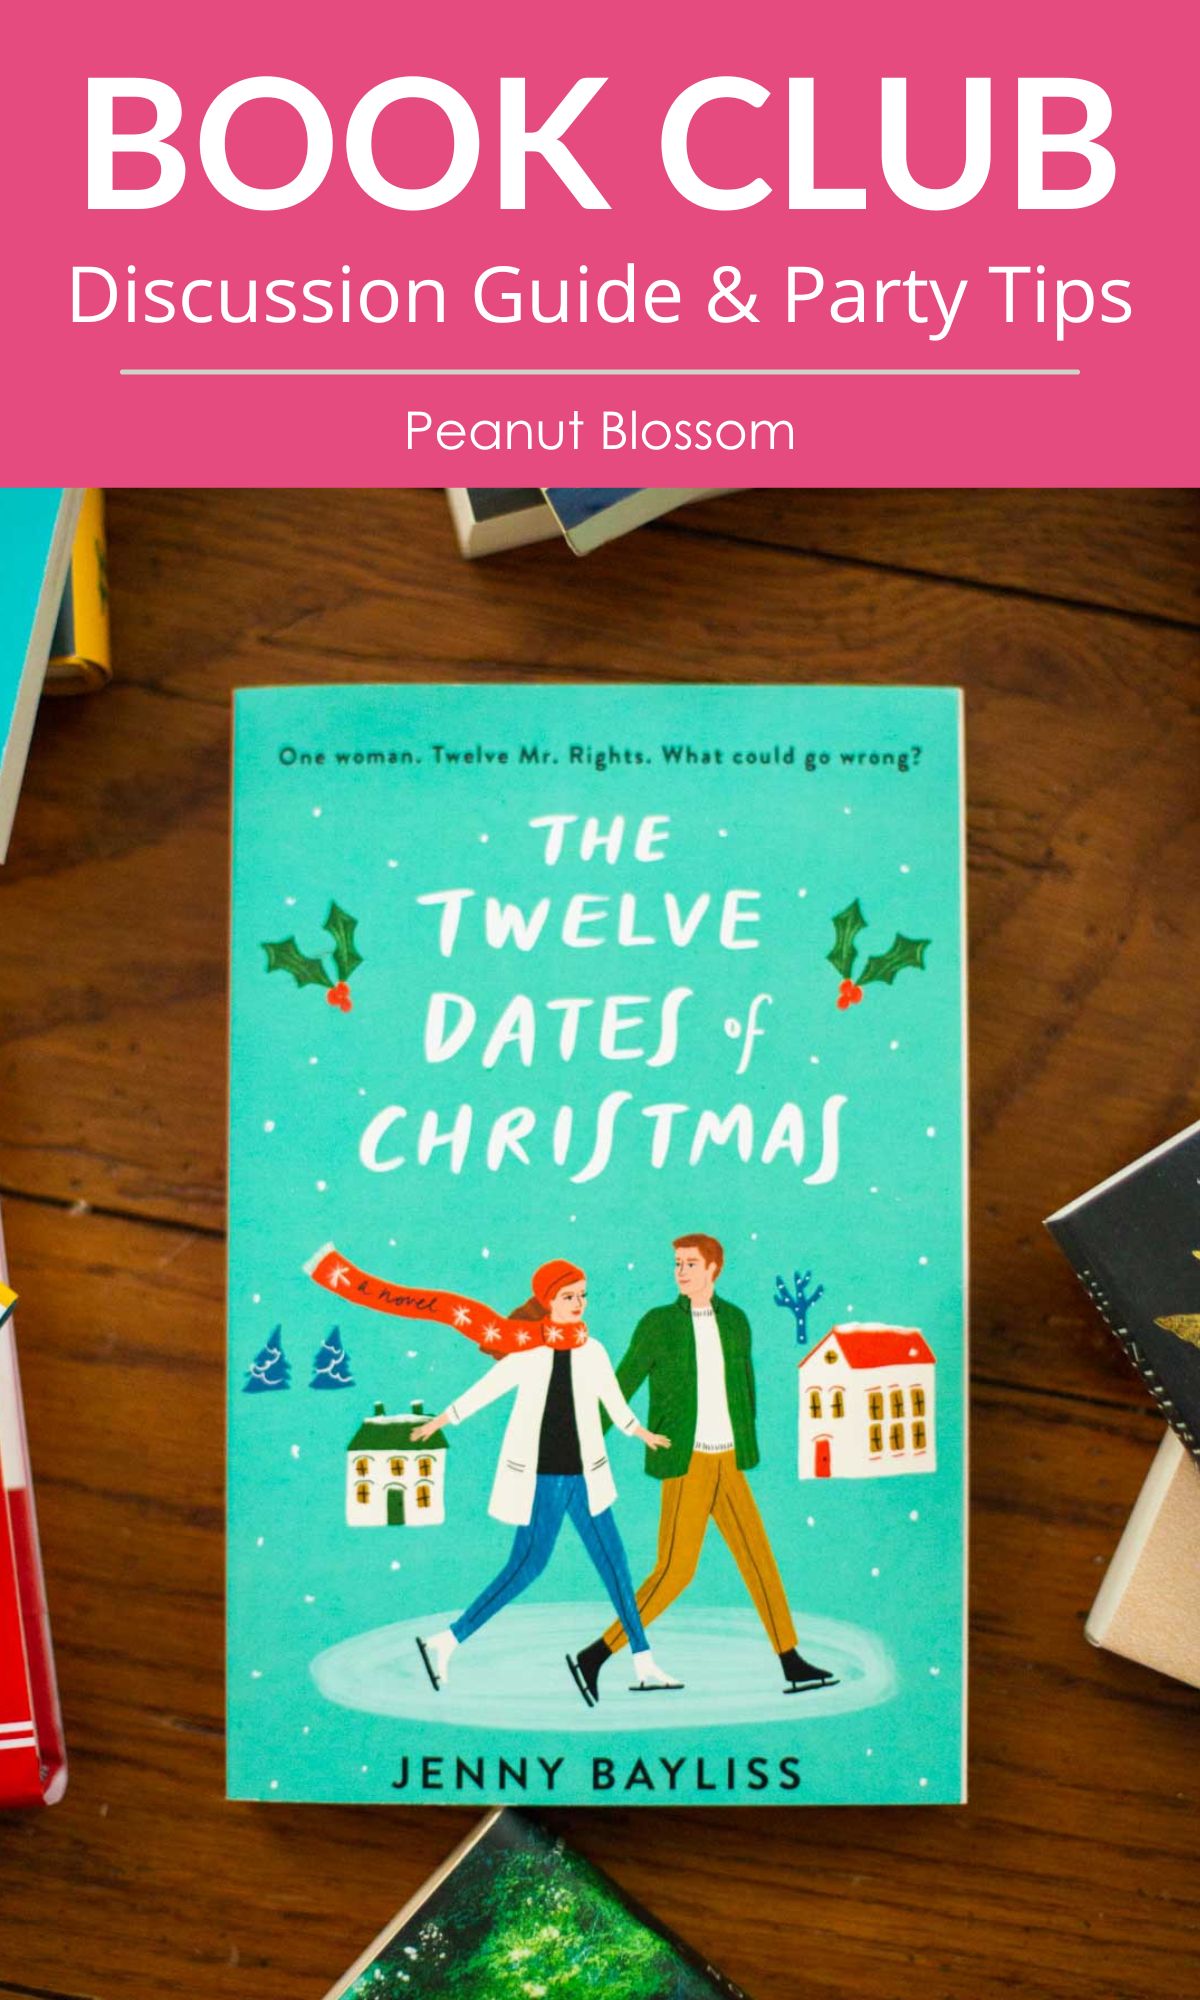 A copy of the book The Twelve Dates of Christmas sits on the table.